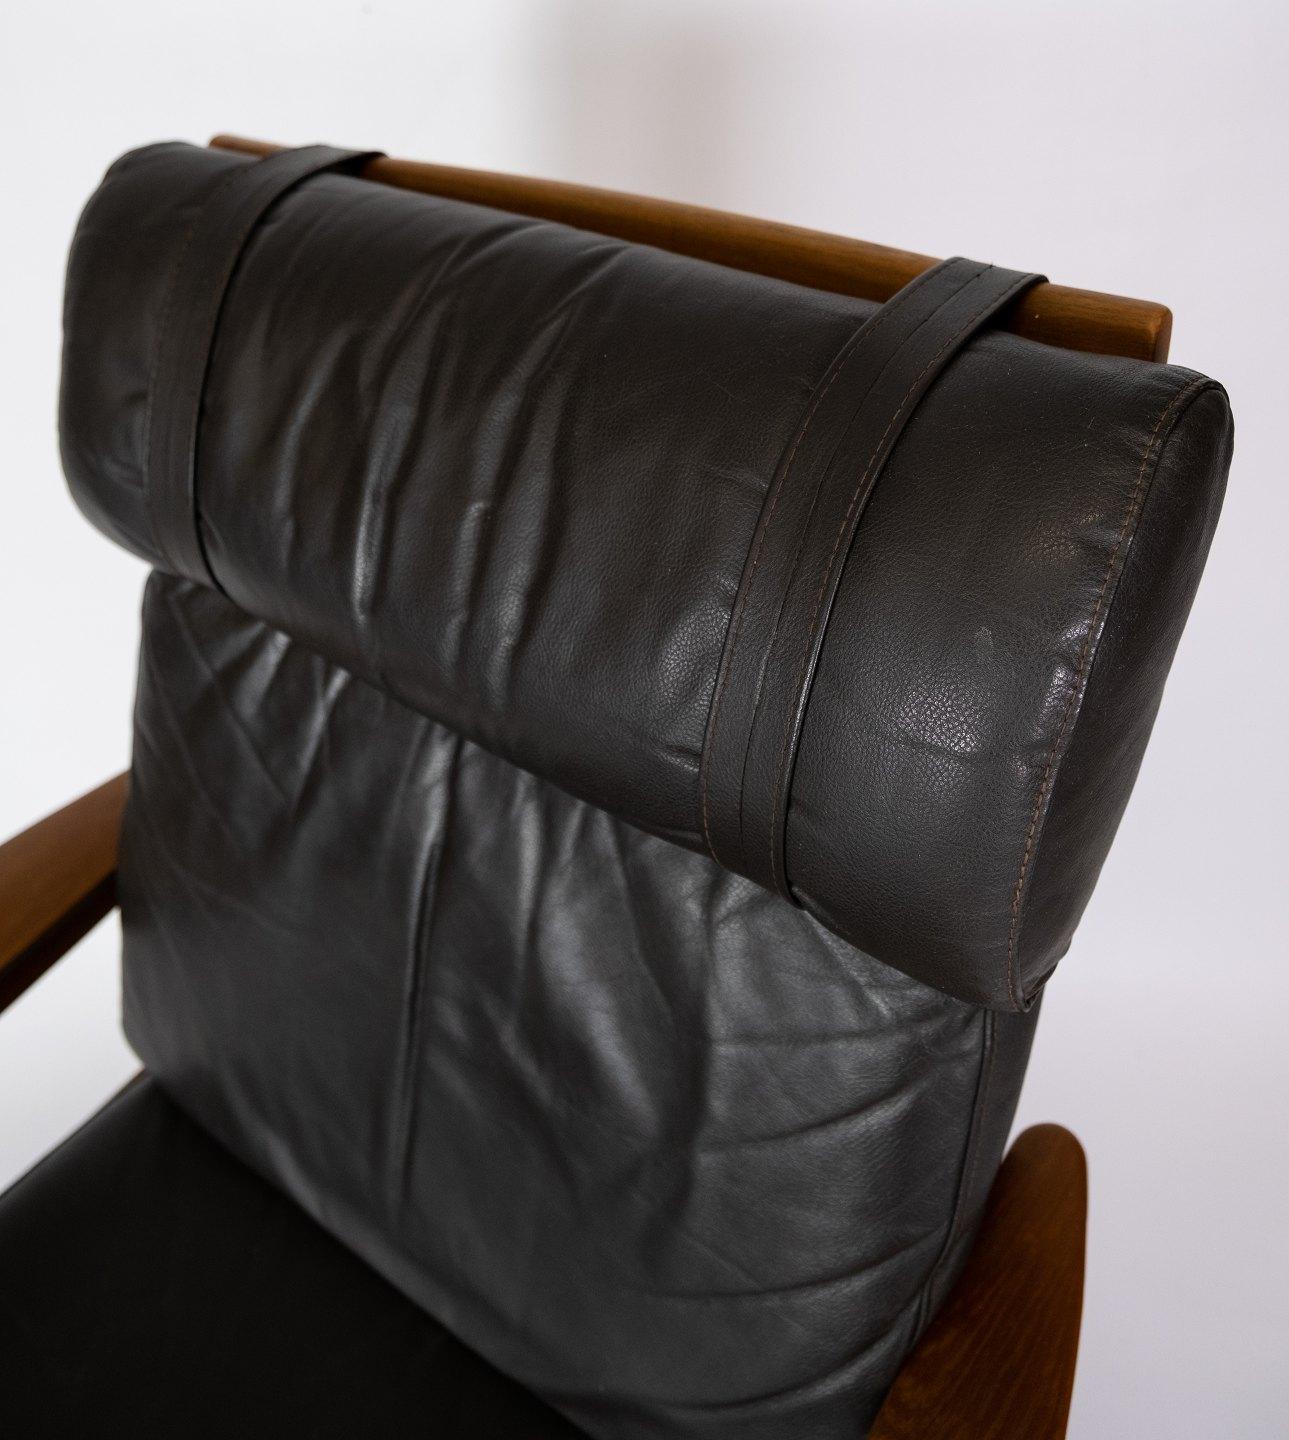 Easy Chair With Stool In Teak Upholstered With Black Leather by Arne Vodder In Good Condition For Sale In Lejre, DK